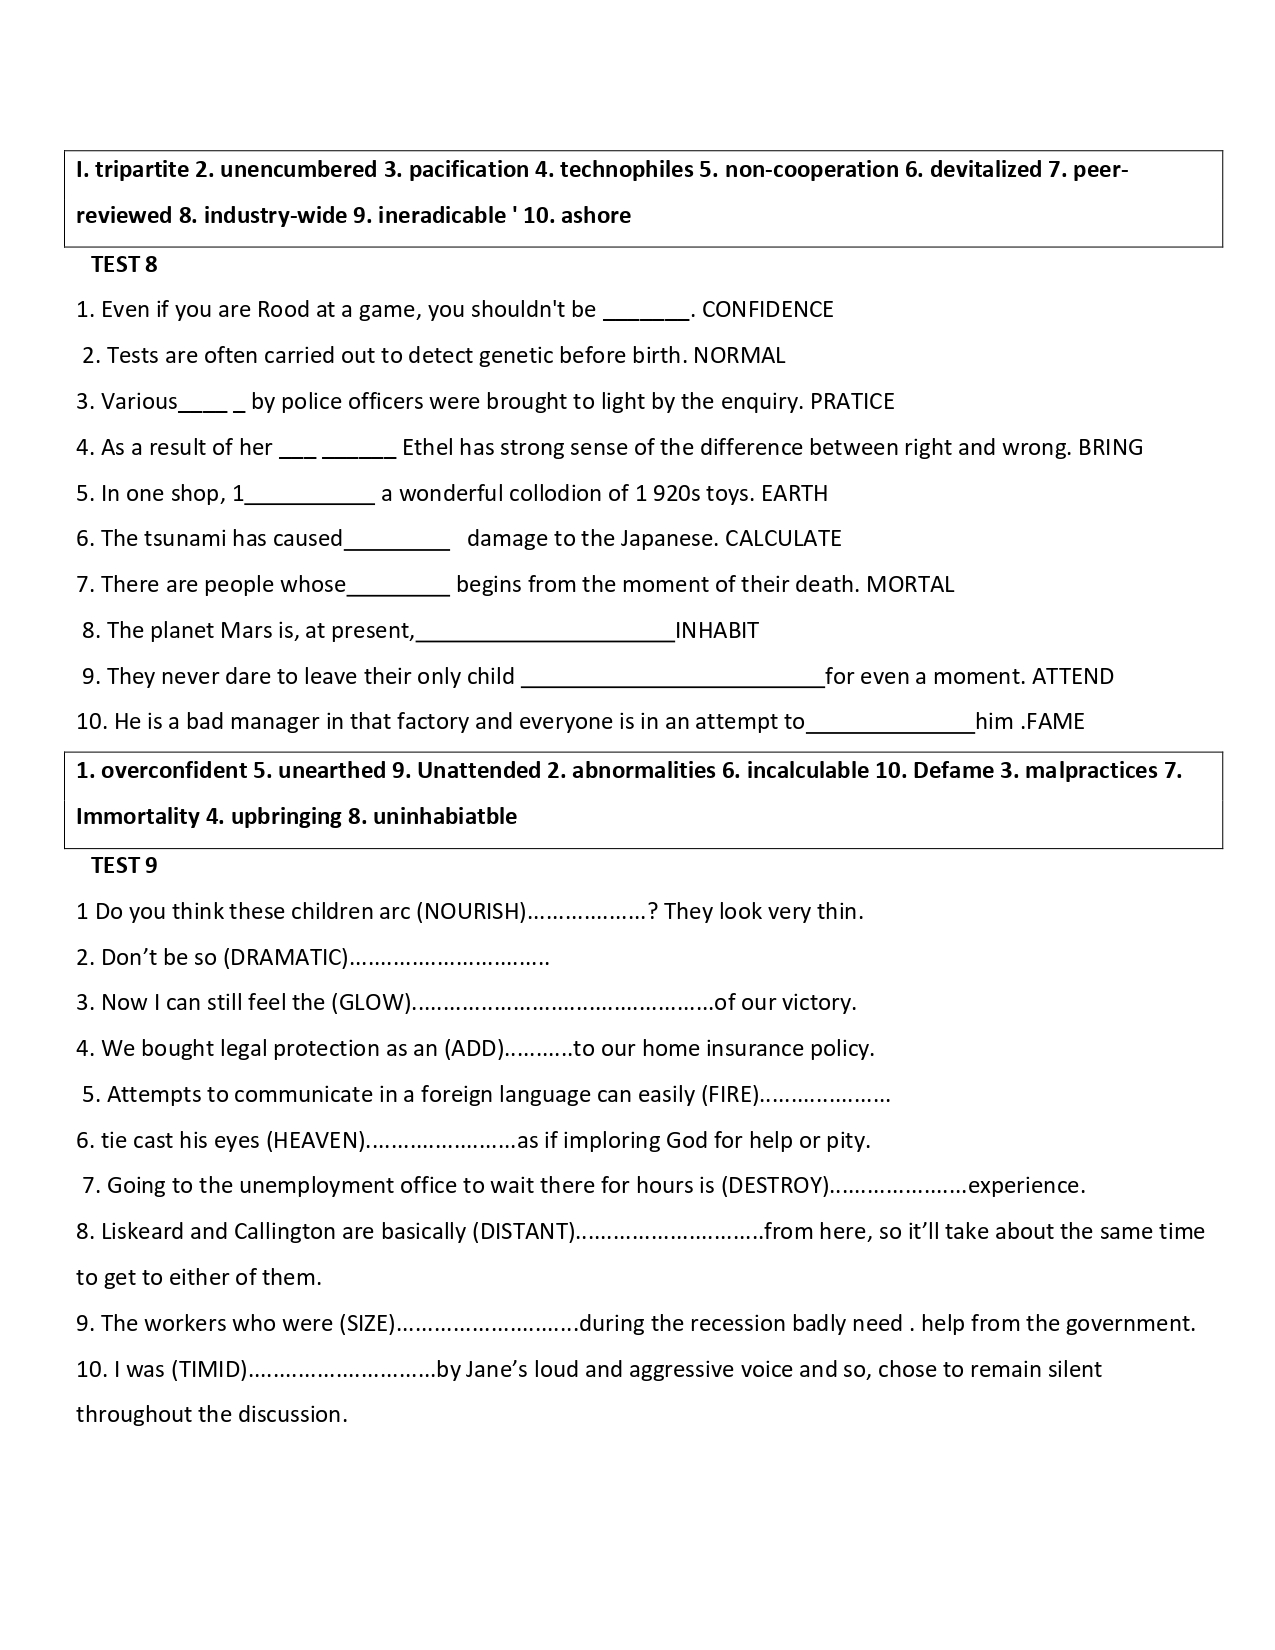 [tailieudieuky.com] 65 pages of word form for gifted students_page-0003